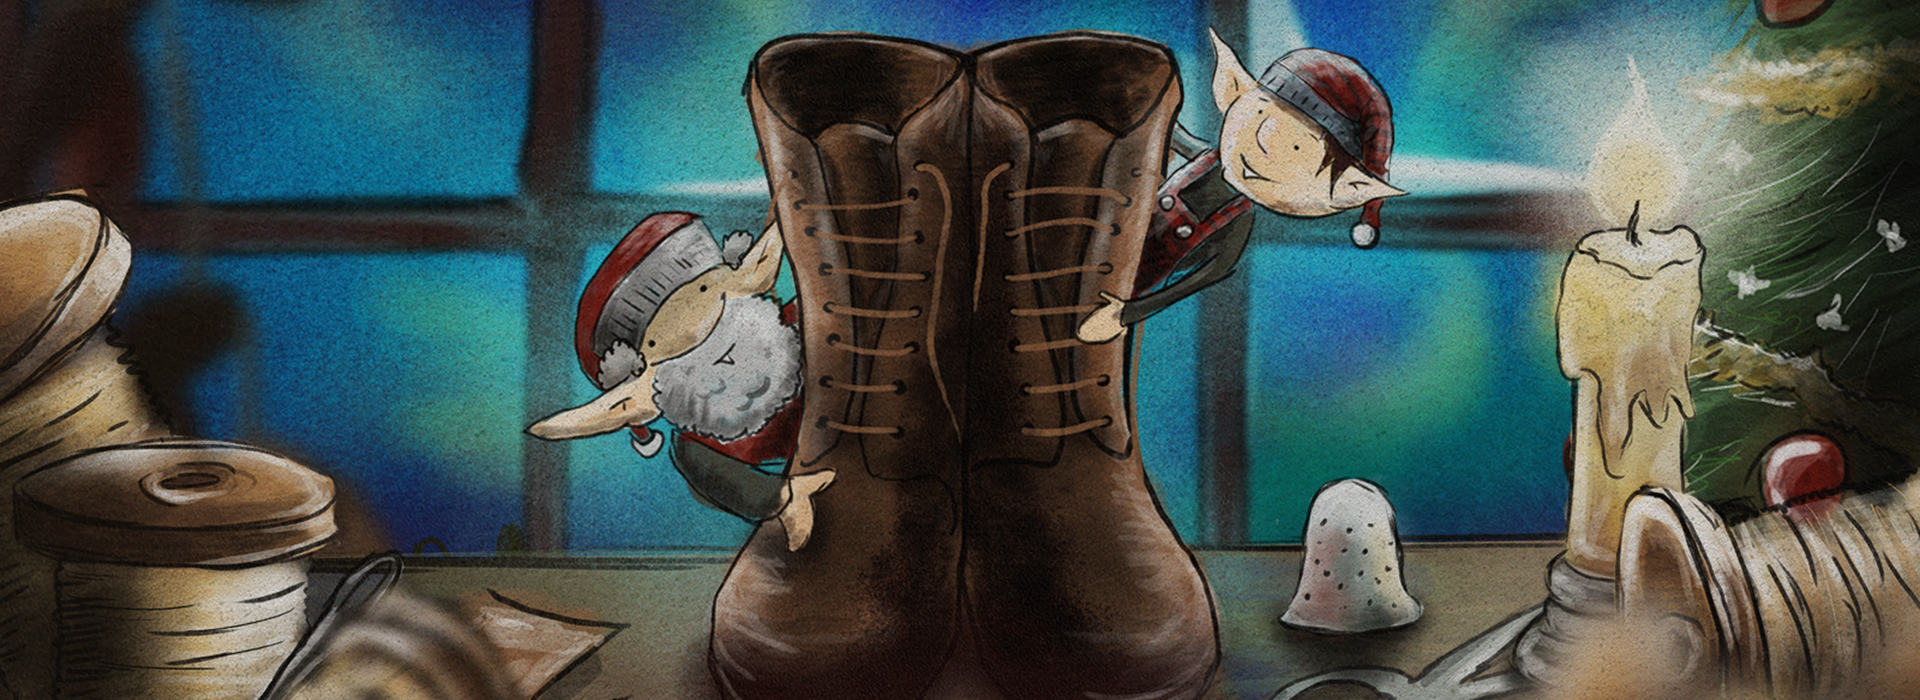 The Elves and The Shoemaker. There are 2 elves in Christmas gear holding onto a pair of boots